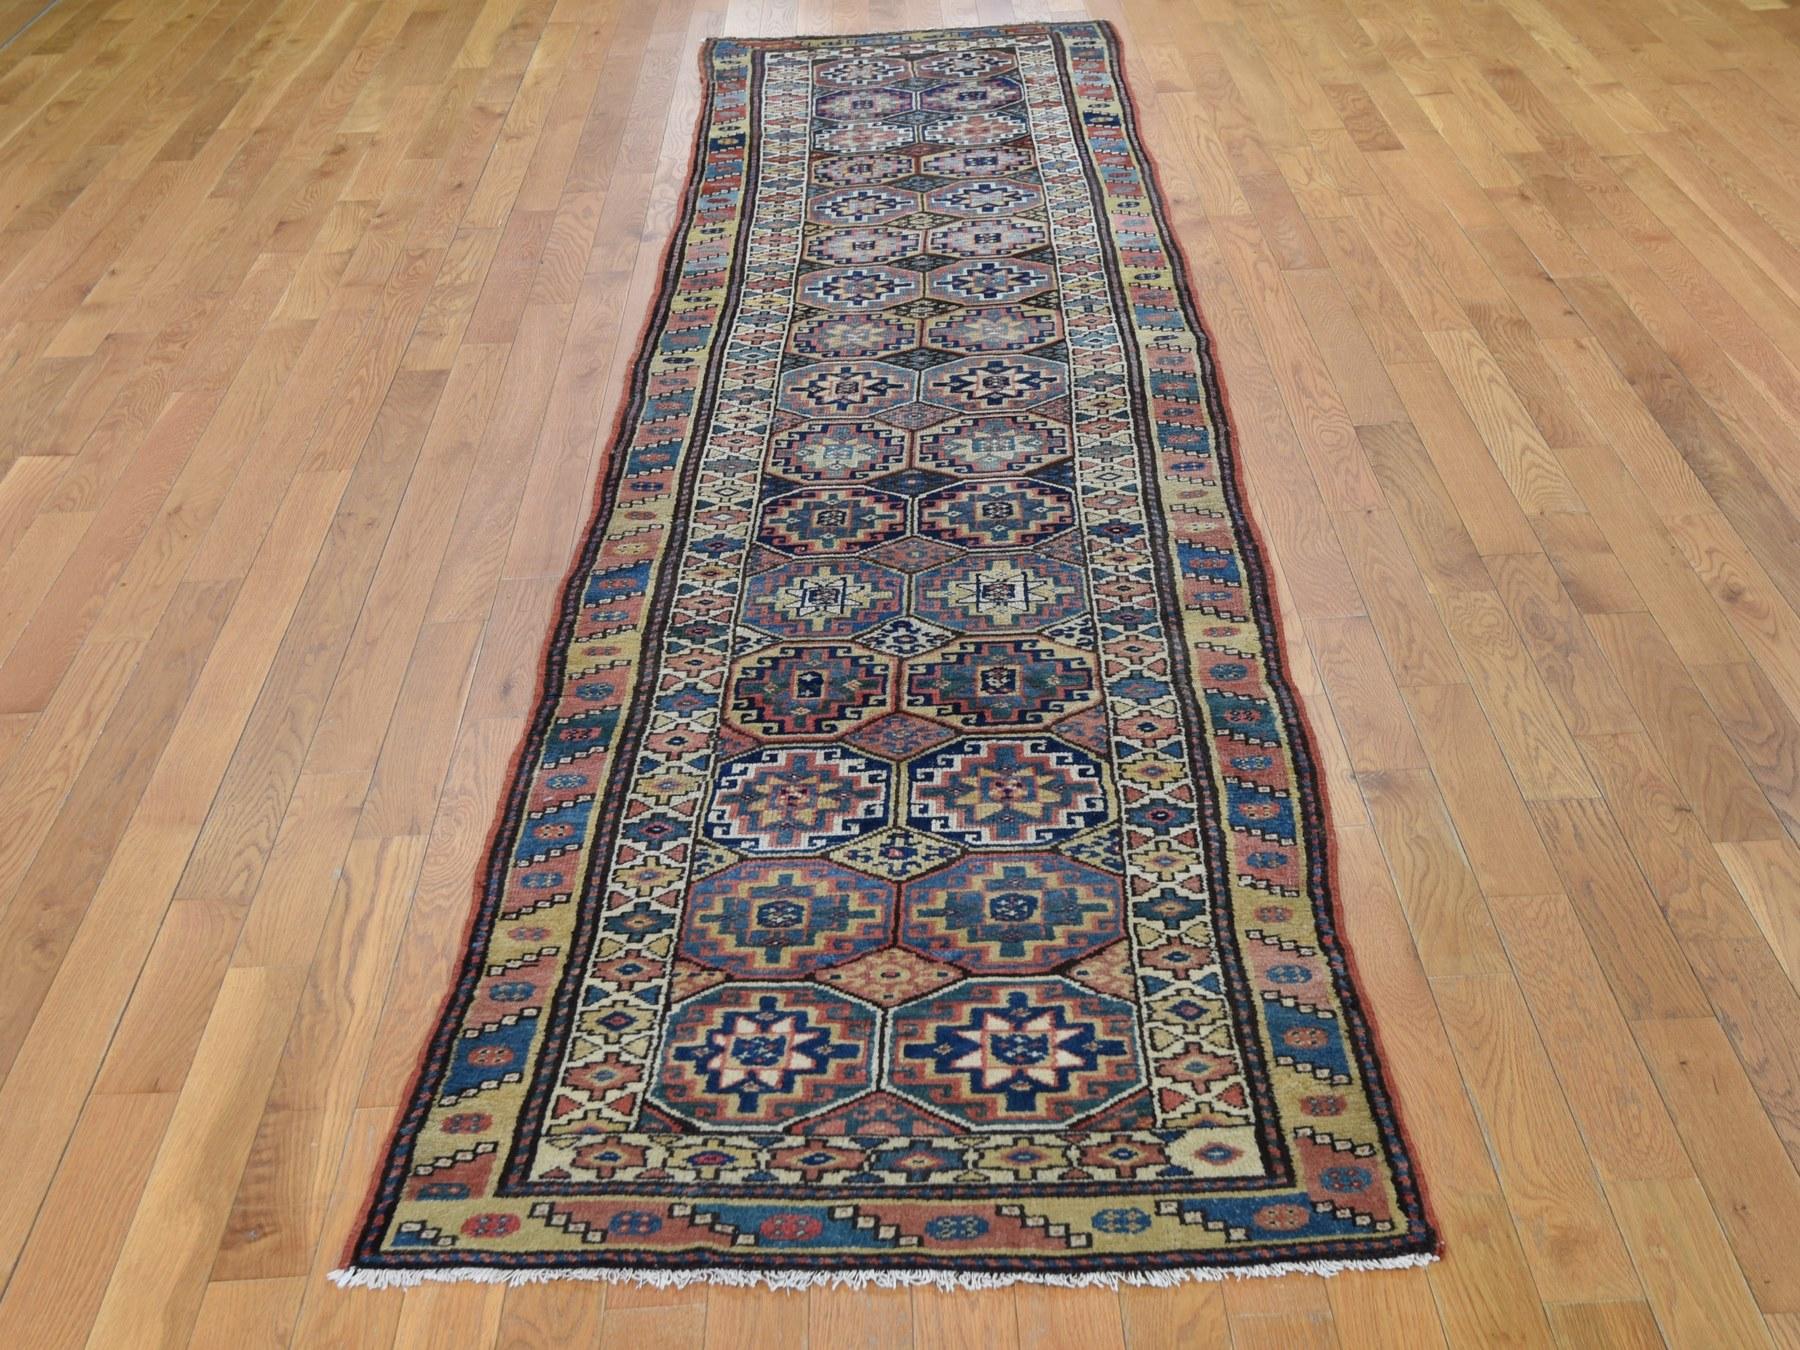 This is a truly genuine one-of-a-kind brown antique Caucasian Kazak double medallion runner hand knotted rug. It has been knotted for months and months in the centuries-old Persian weaving craftsmanship techniques by expert artisans.

Primary